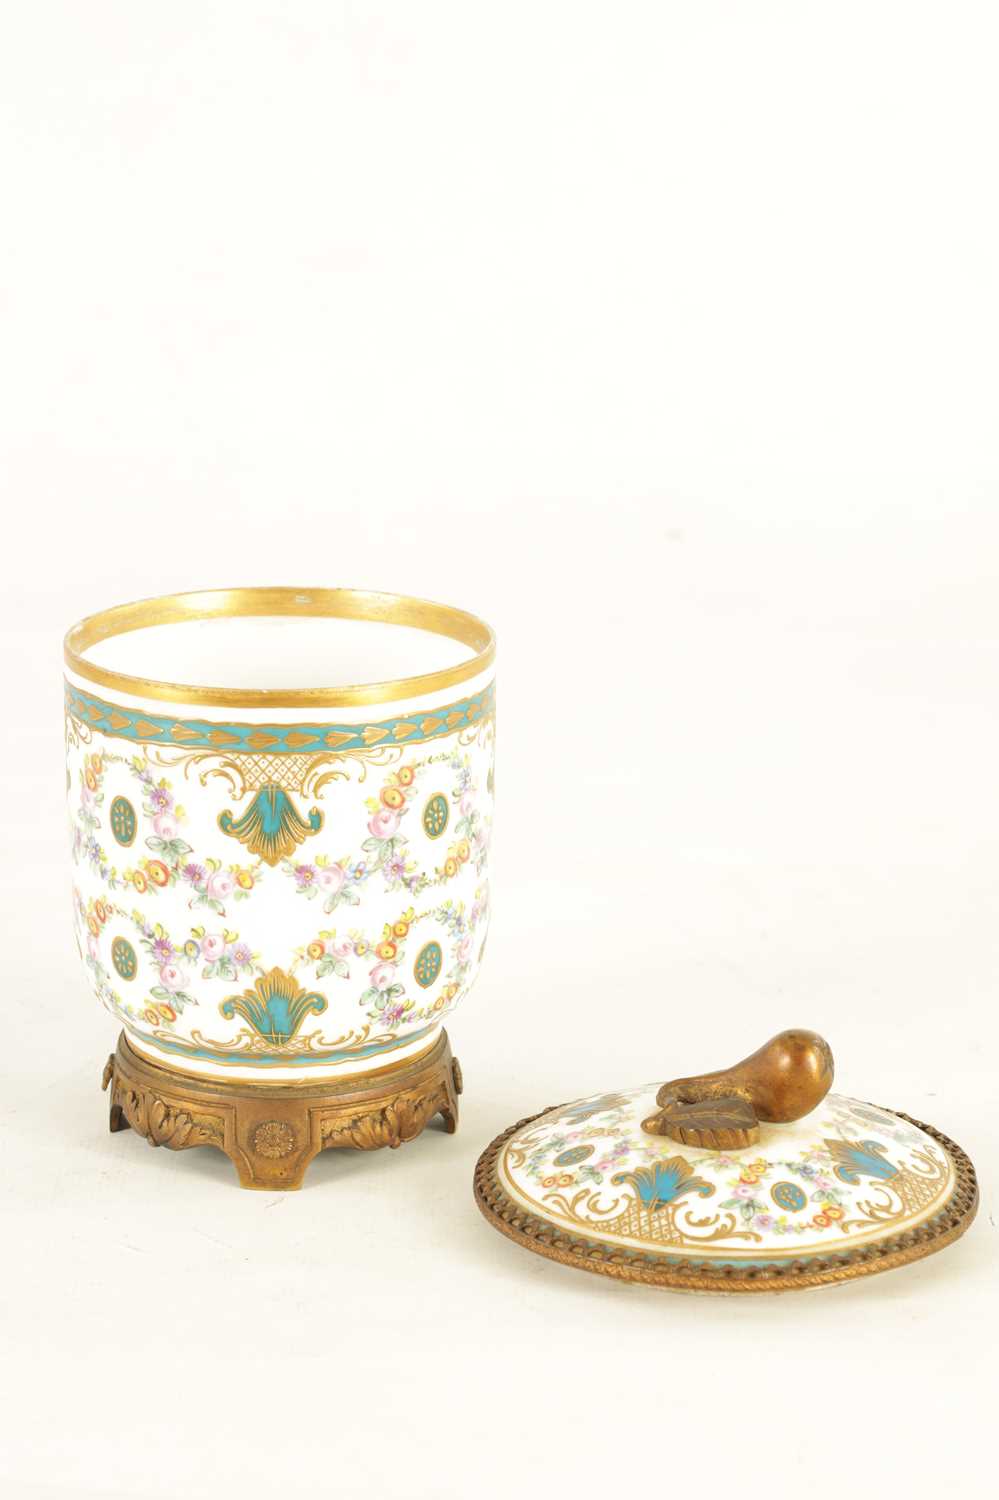 A MID 18TH CENTURY ORMOLU MOUNTED SEVRES JAR AND COVER - Image 4 of 7